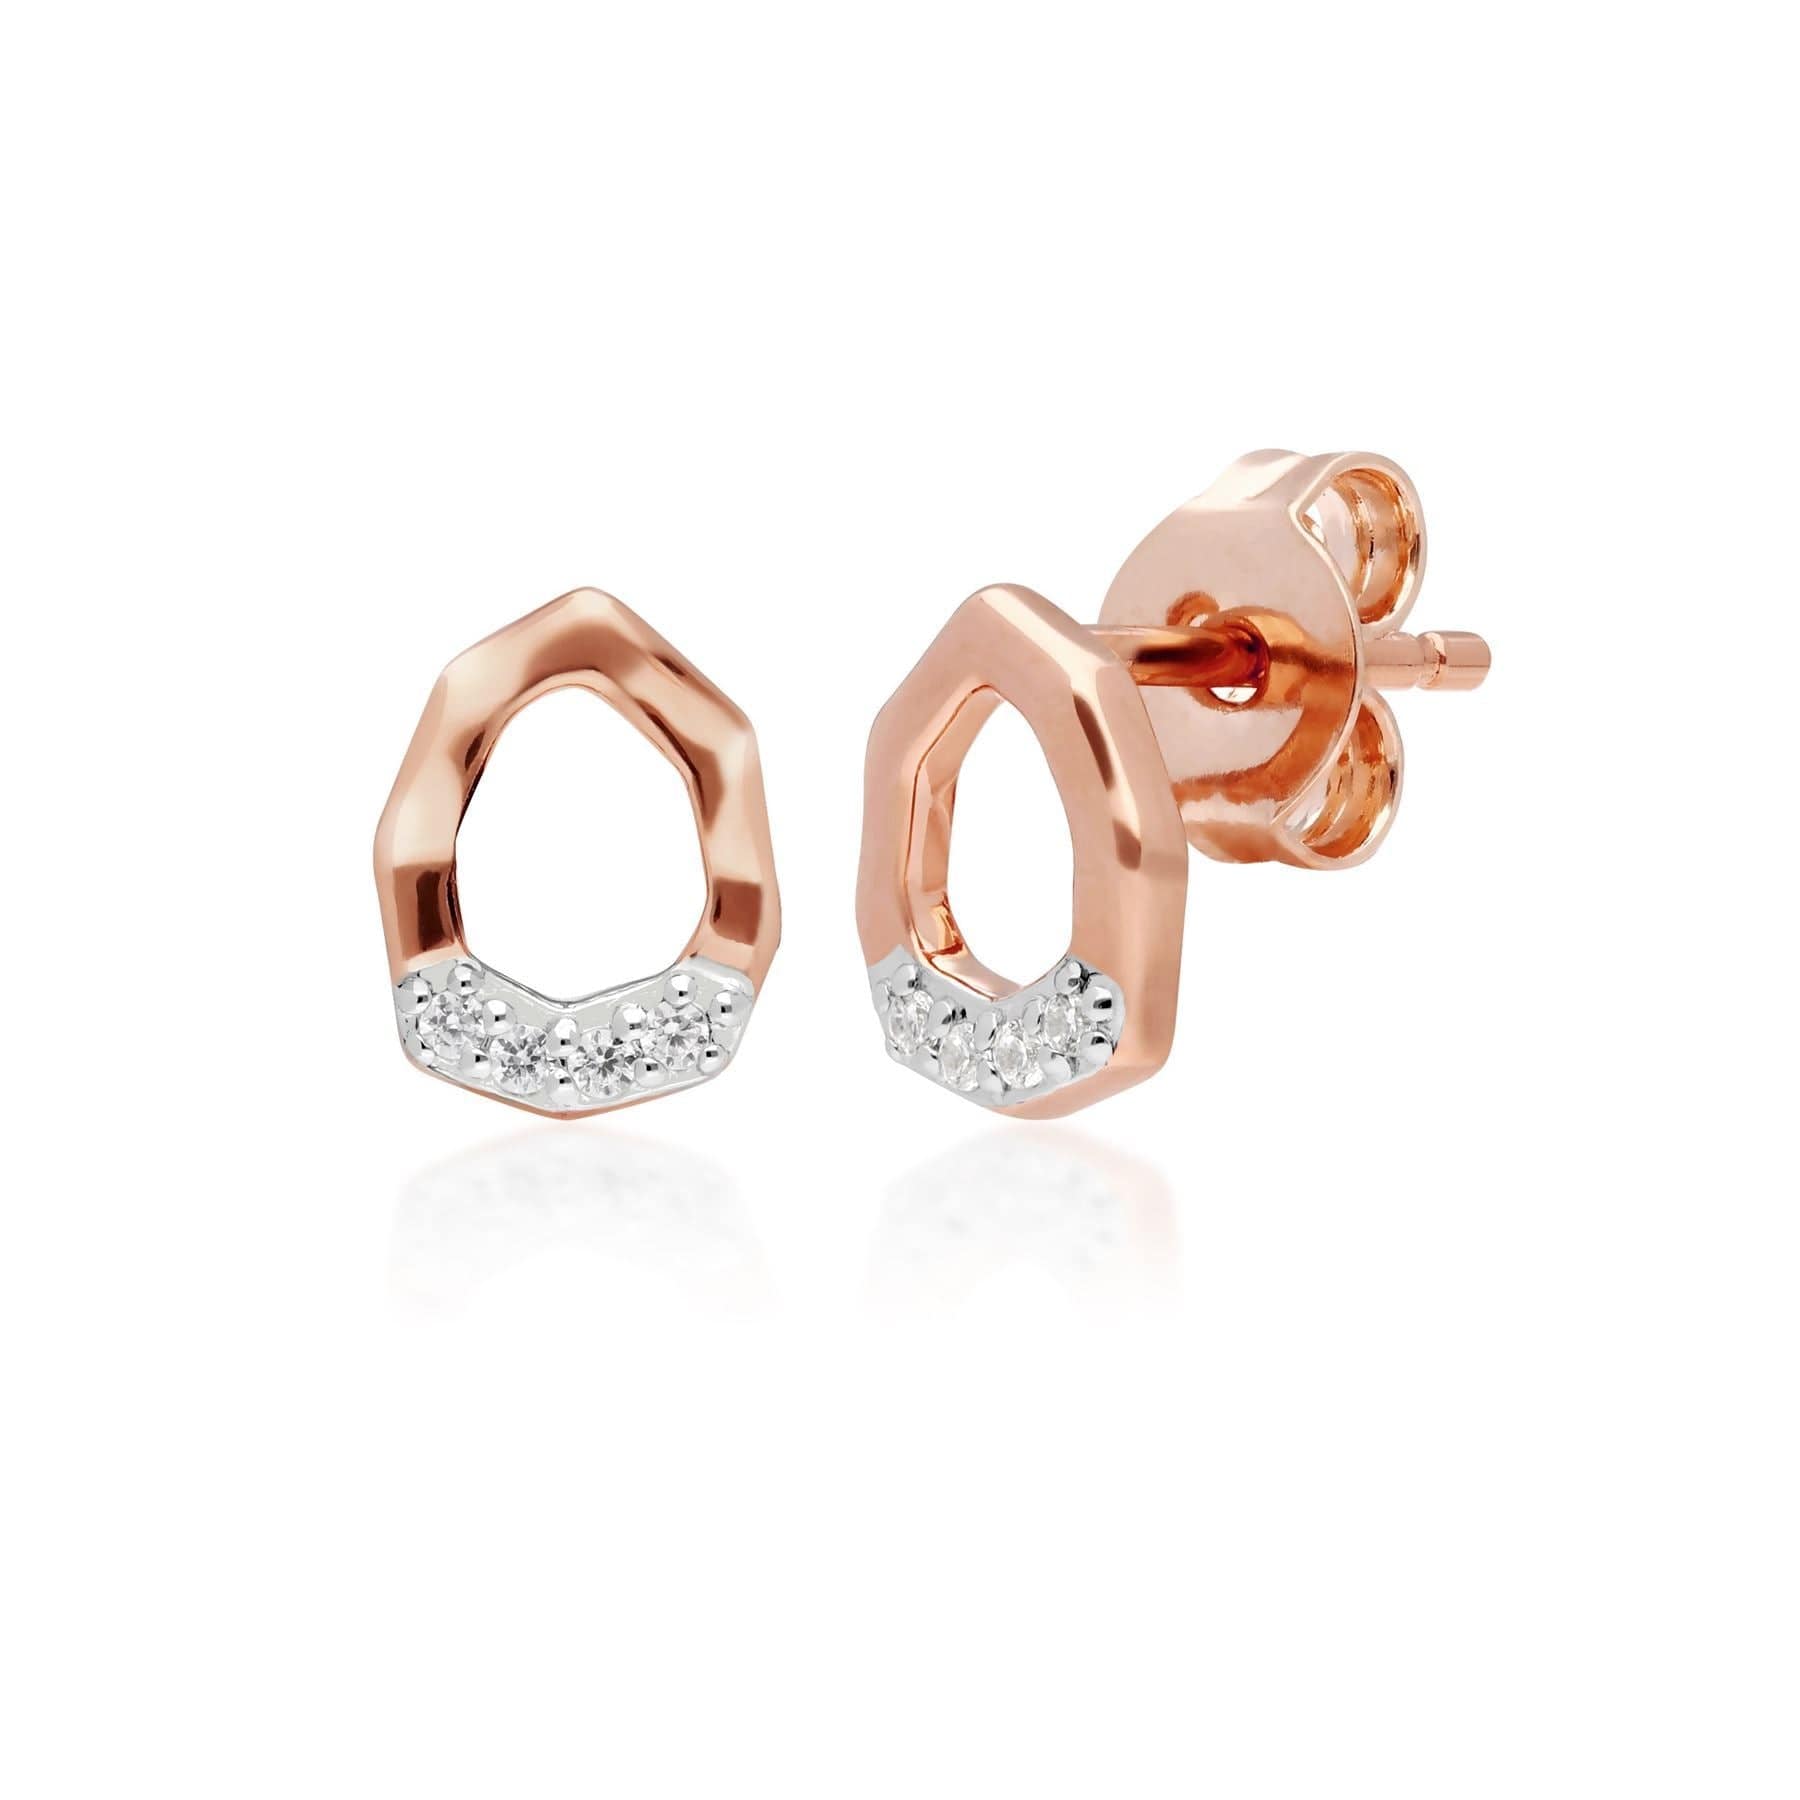 Diamond Pave Asymmetrical Stud Earrings in 9ct Rose Gold